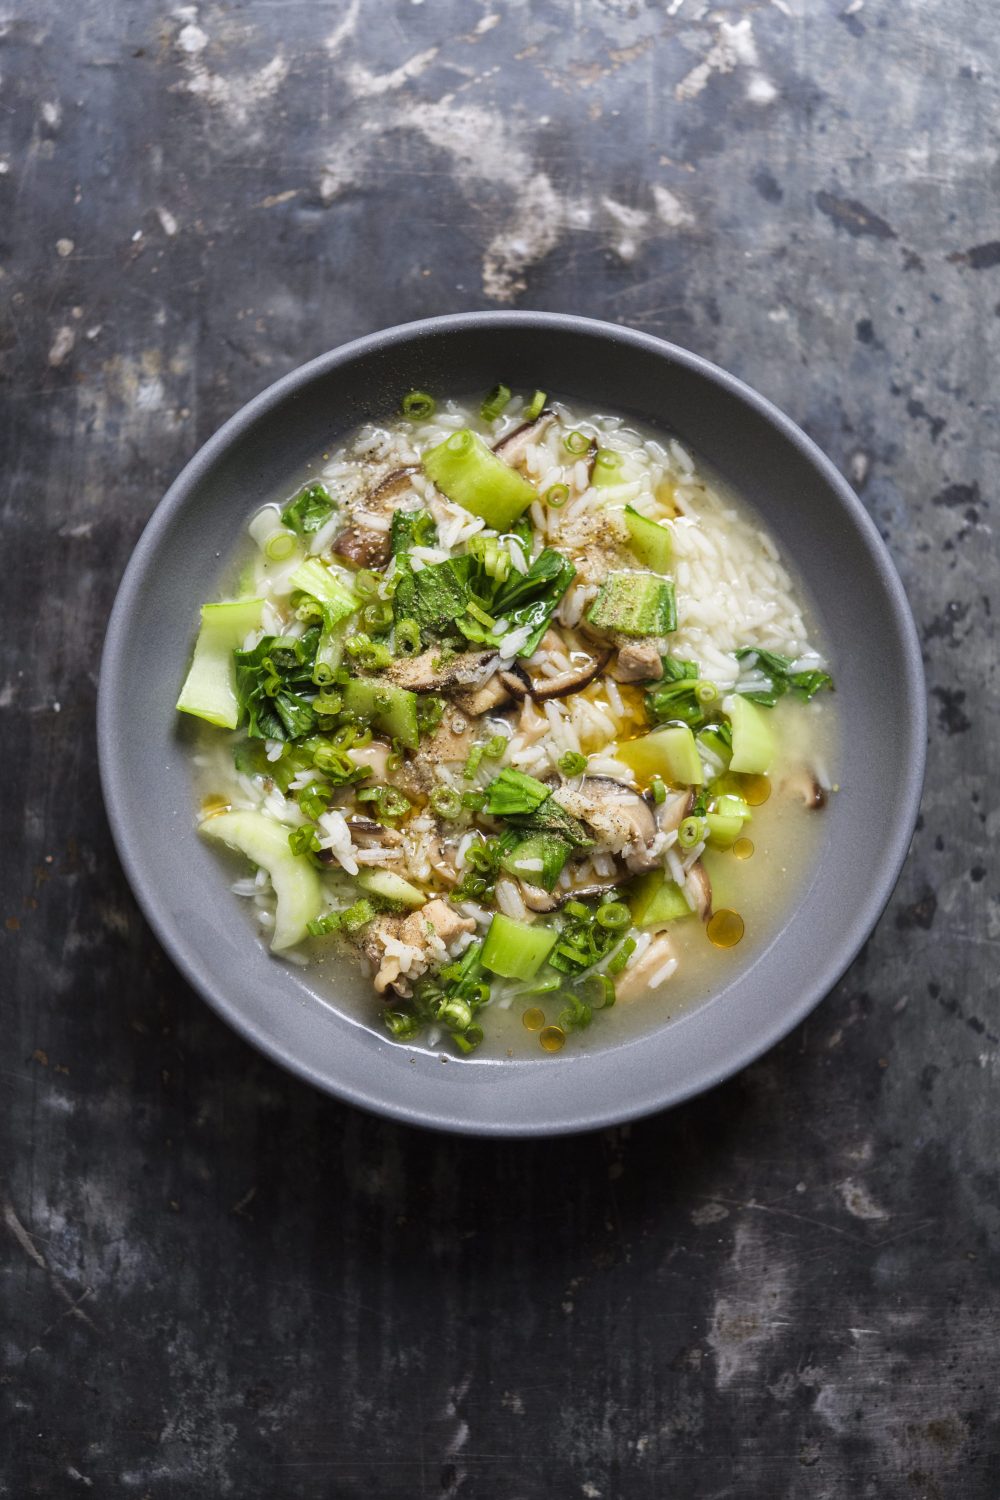 Soupy Rice with Chicken, Bok Choy and Mushrooms (Pao Fan)